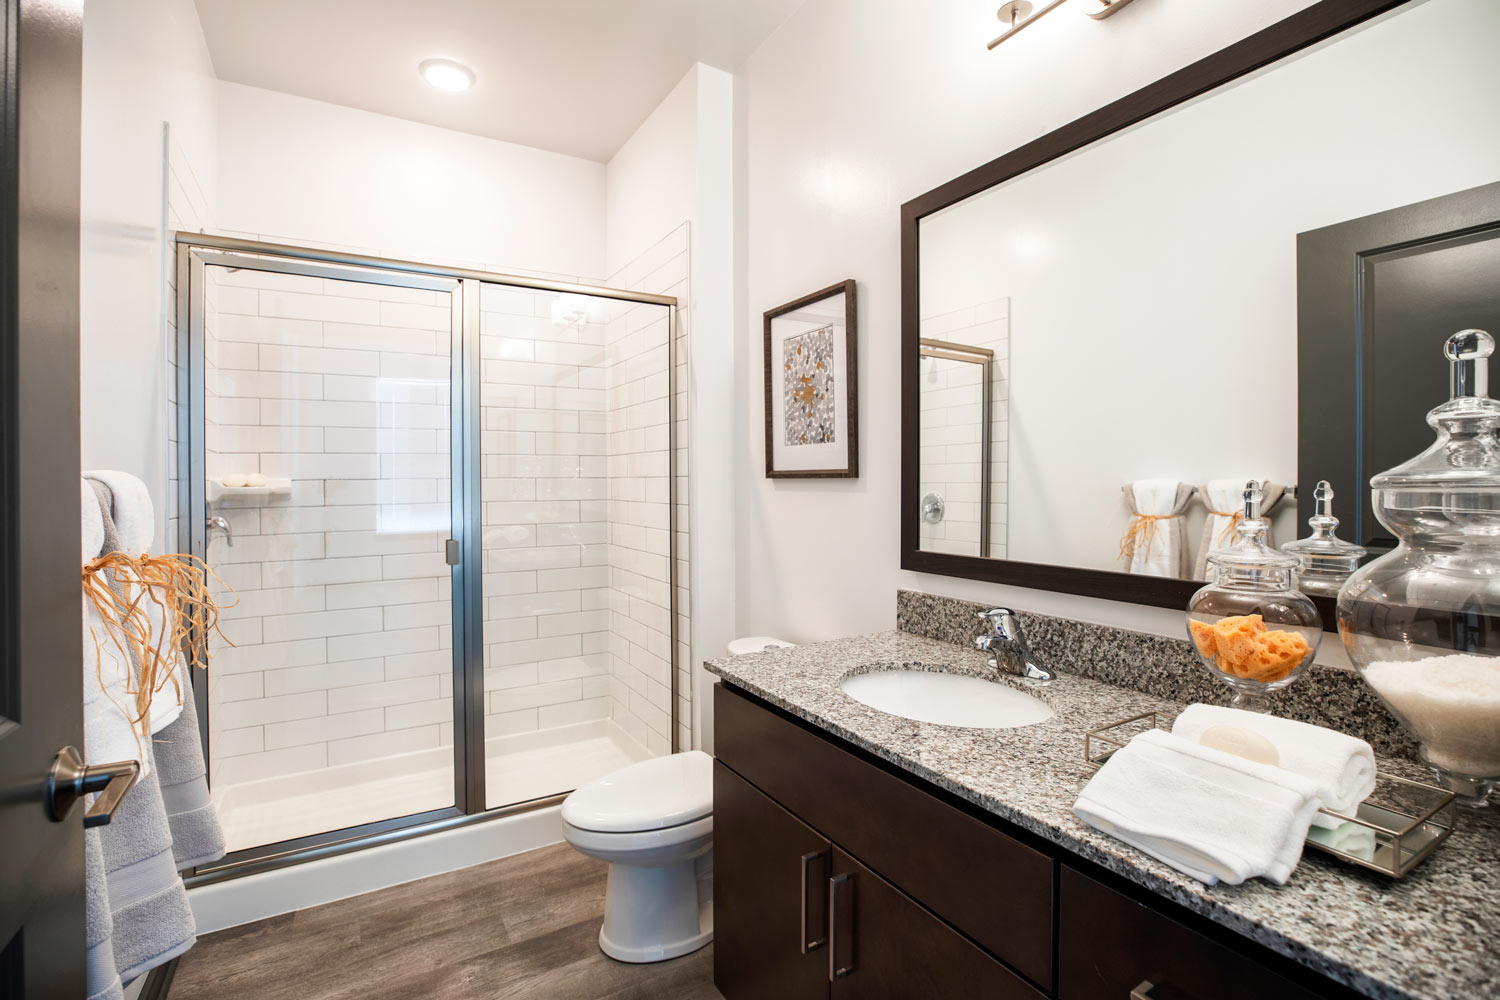 Modern bathrooms with designer finishes and walk-in shower | Dartmoor Place